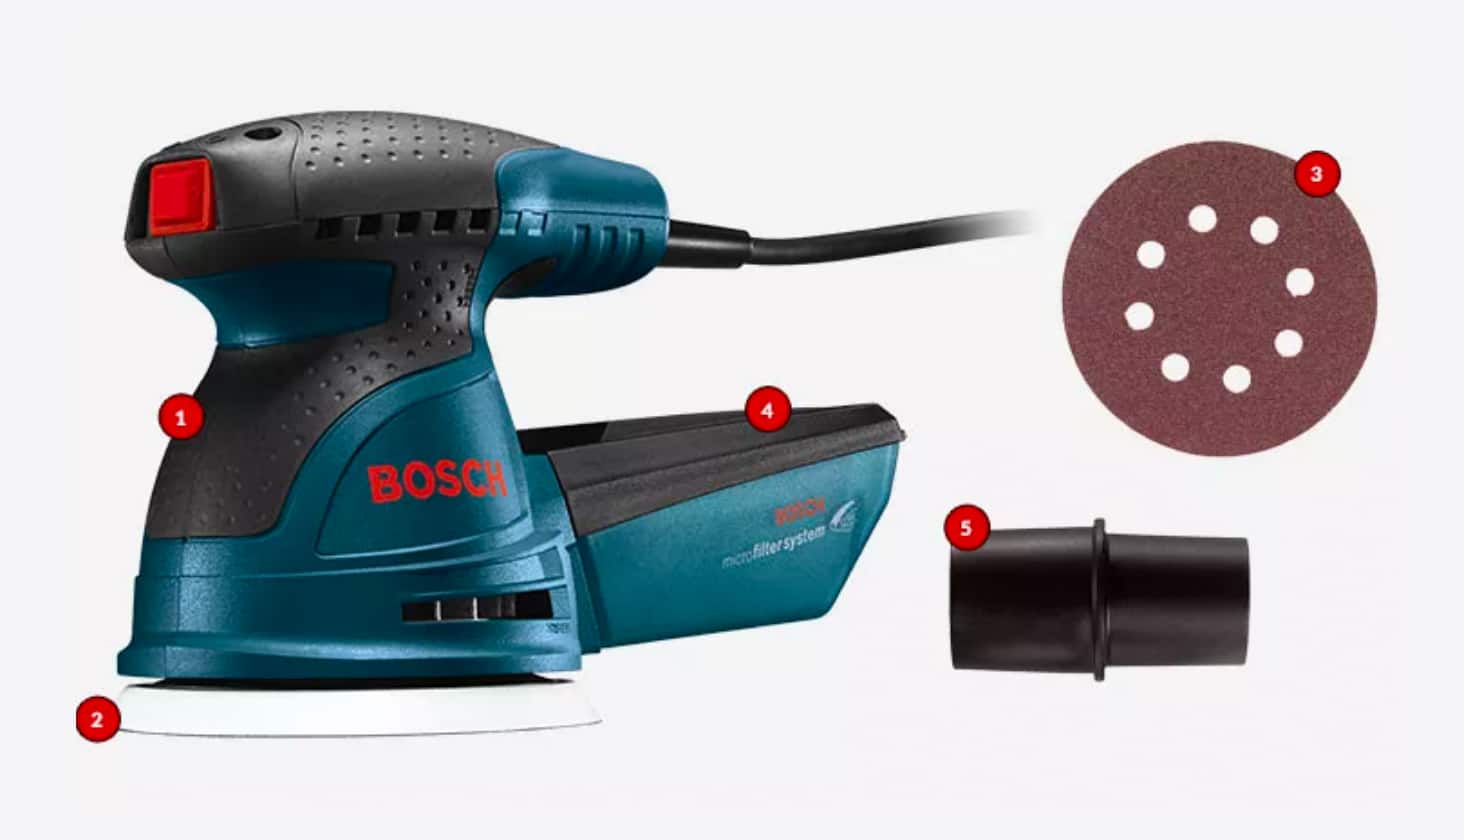 Bosch ROS10 Palm Sander, Soft backing pad, Sanding disc, Dust canister, and Vacuum hose adapter.